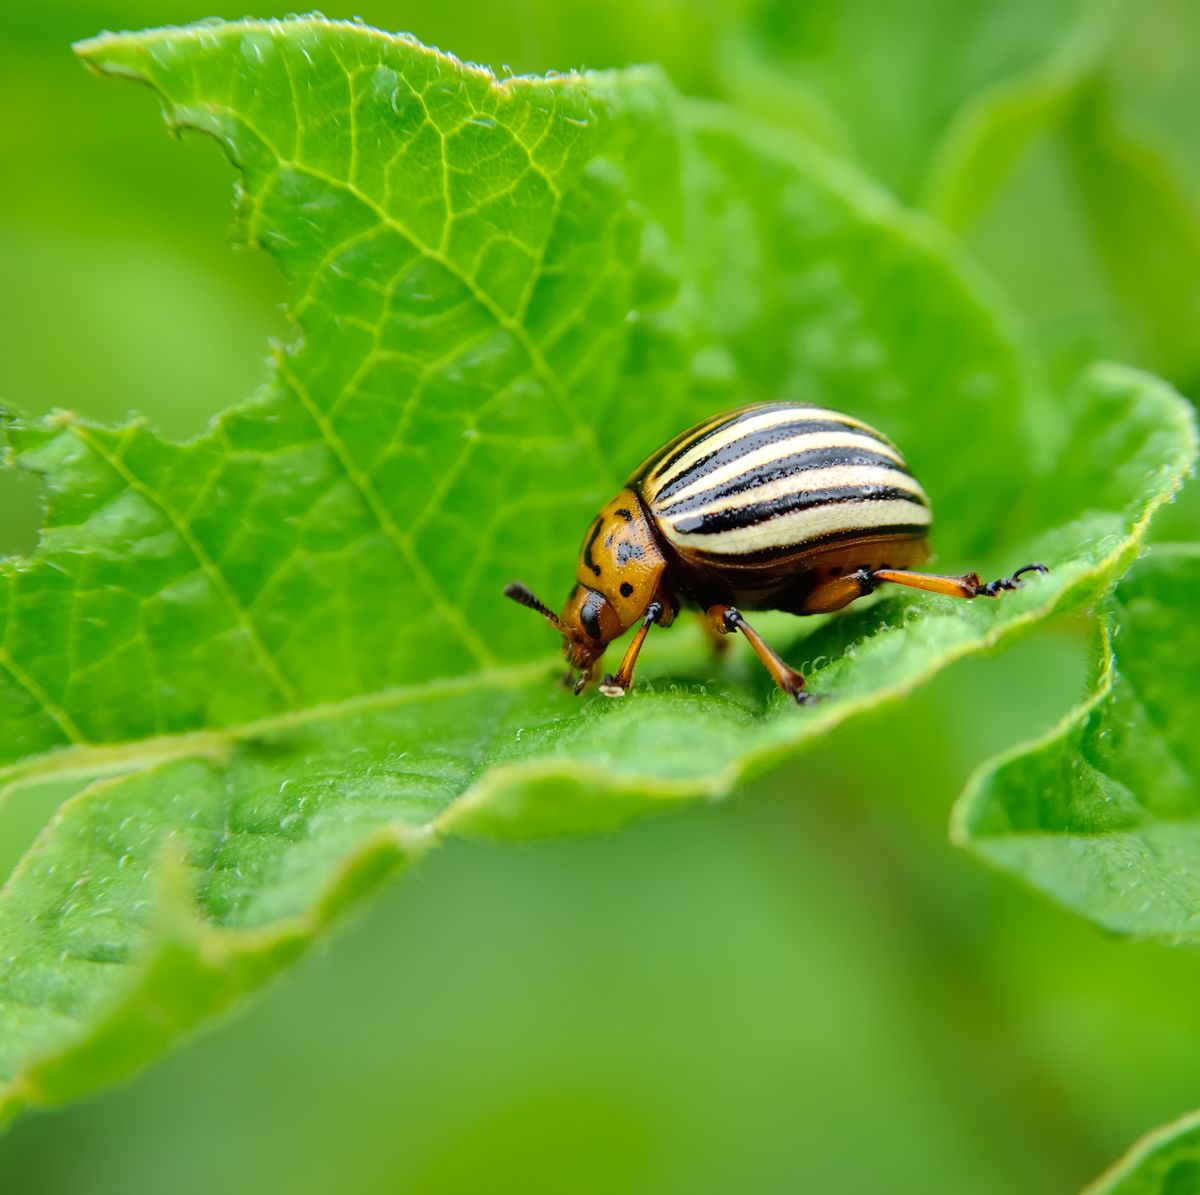 10 Most Destructive Garden Pests - How to Keep Common Bugs Out of ...